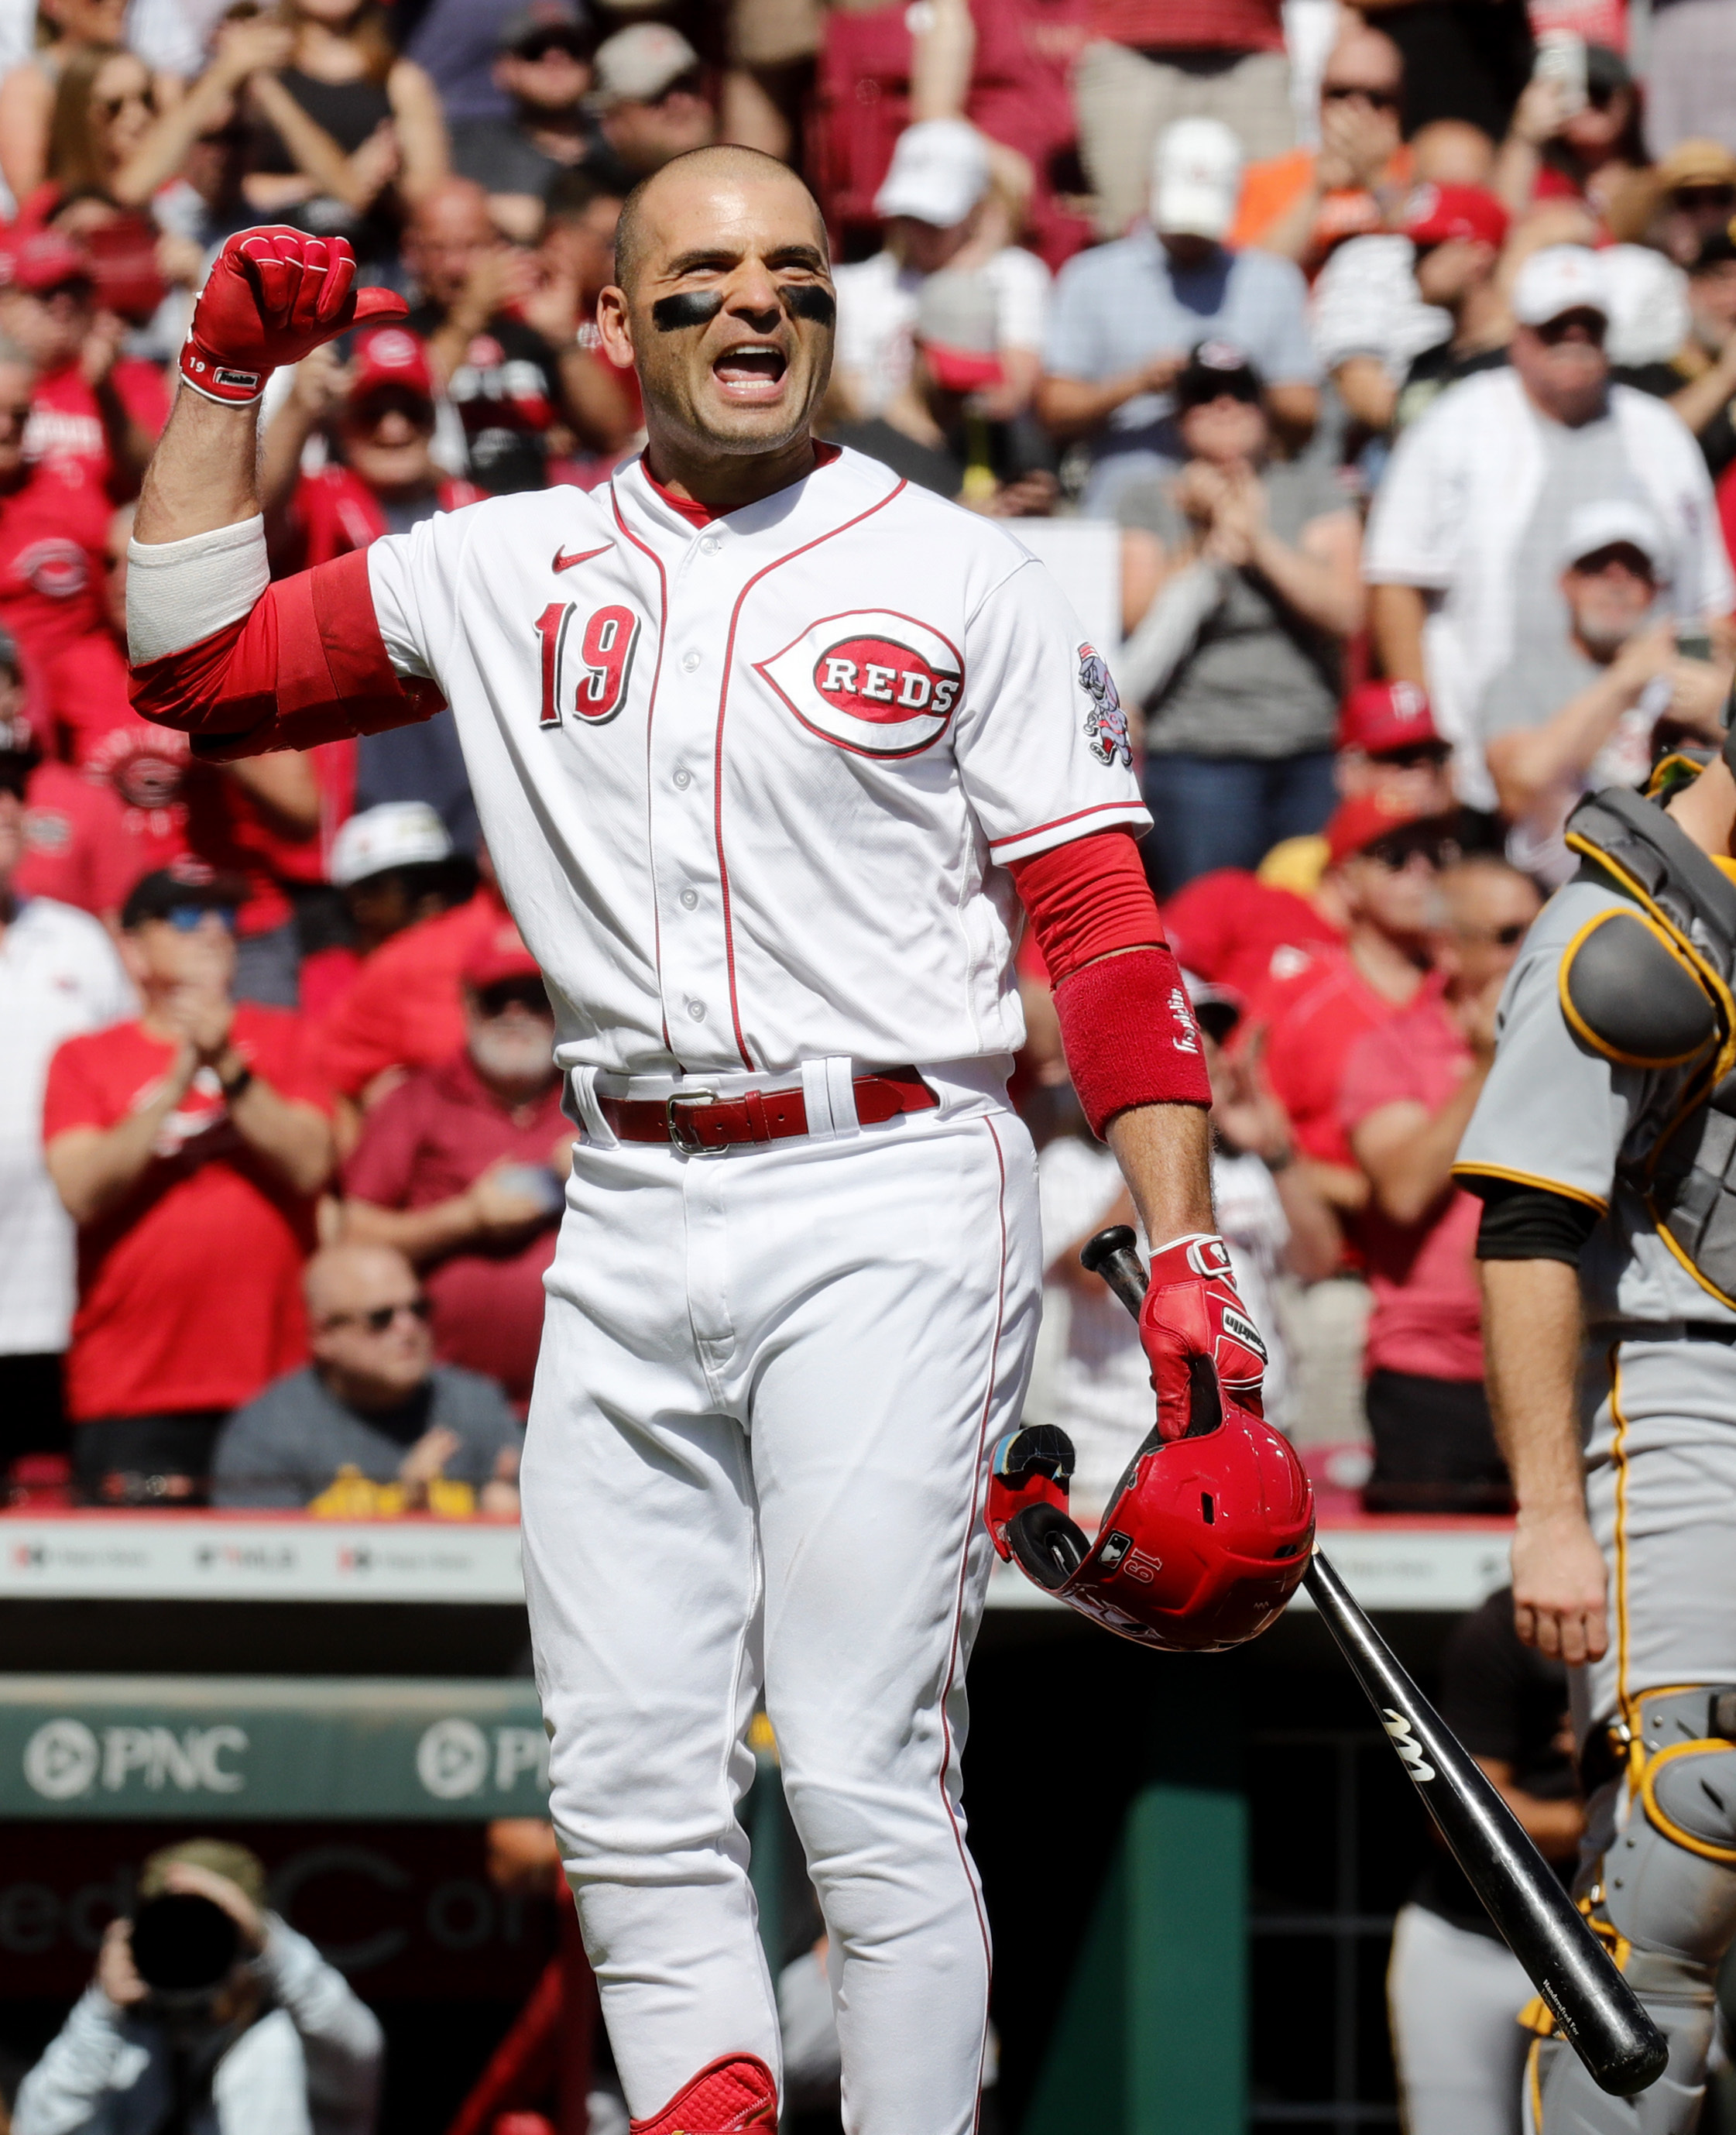 Reds bounce back, rally for win over Pirates as they chase Wild Card